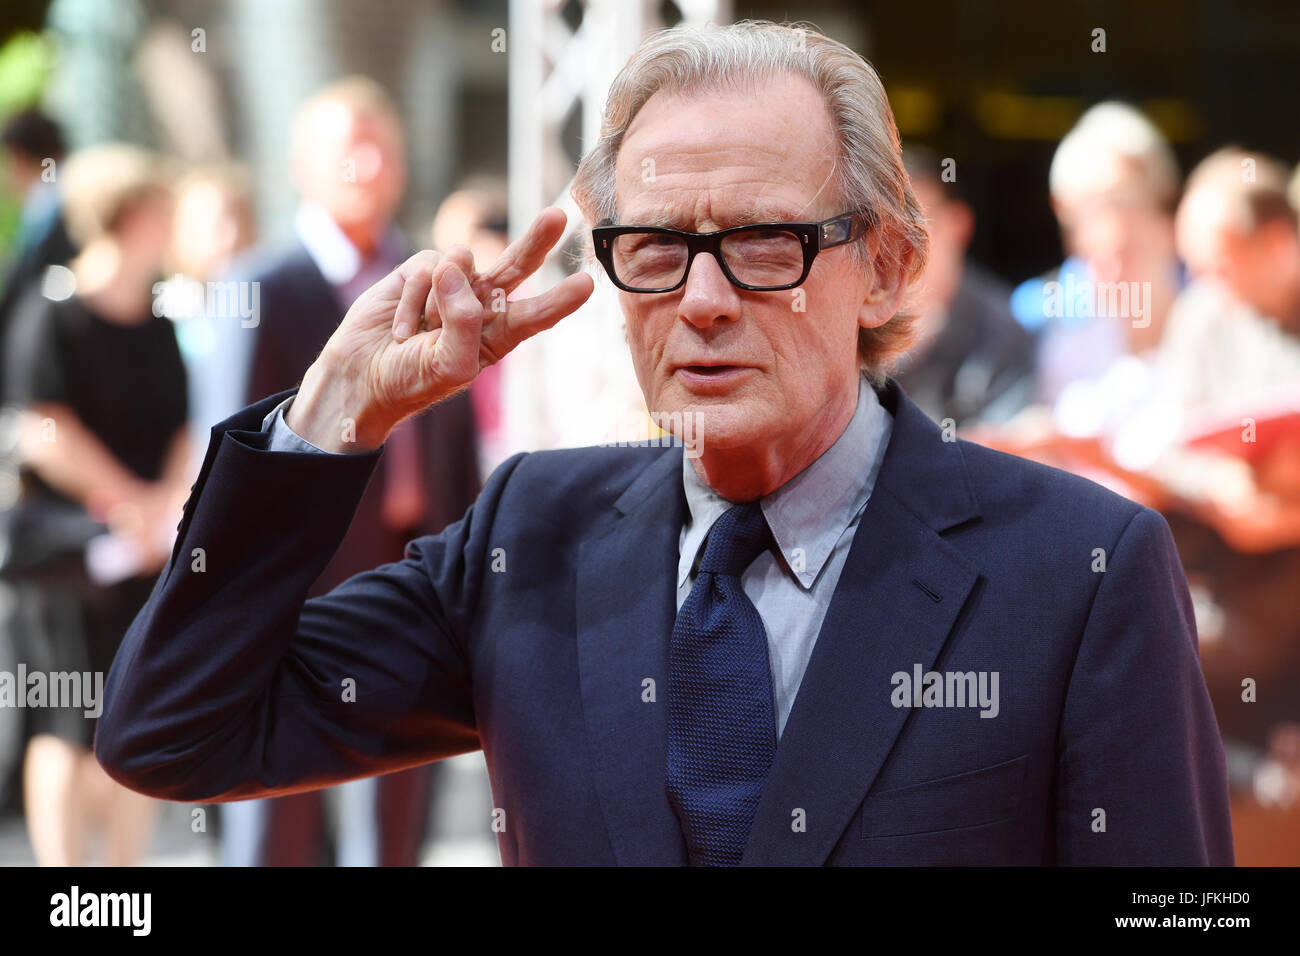 Munich, Germany. 1st July, 2017. The actor Bill Nighy arrives for the award ceremony and the German premiere of the closing film 'Their Finest' during the Munich Film Festival in Munich, Germany, 1 July 2017. Photo: Tobias Hase/dpa/Alamy Live News Stock Photo